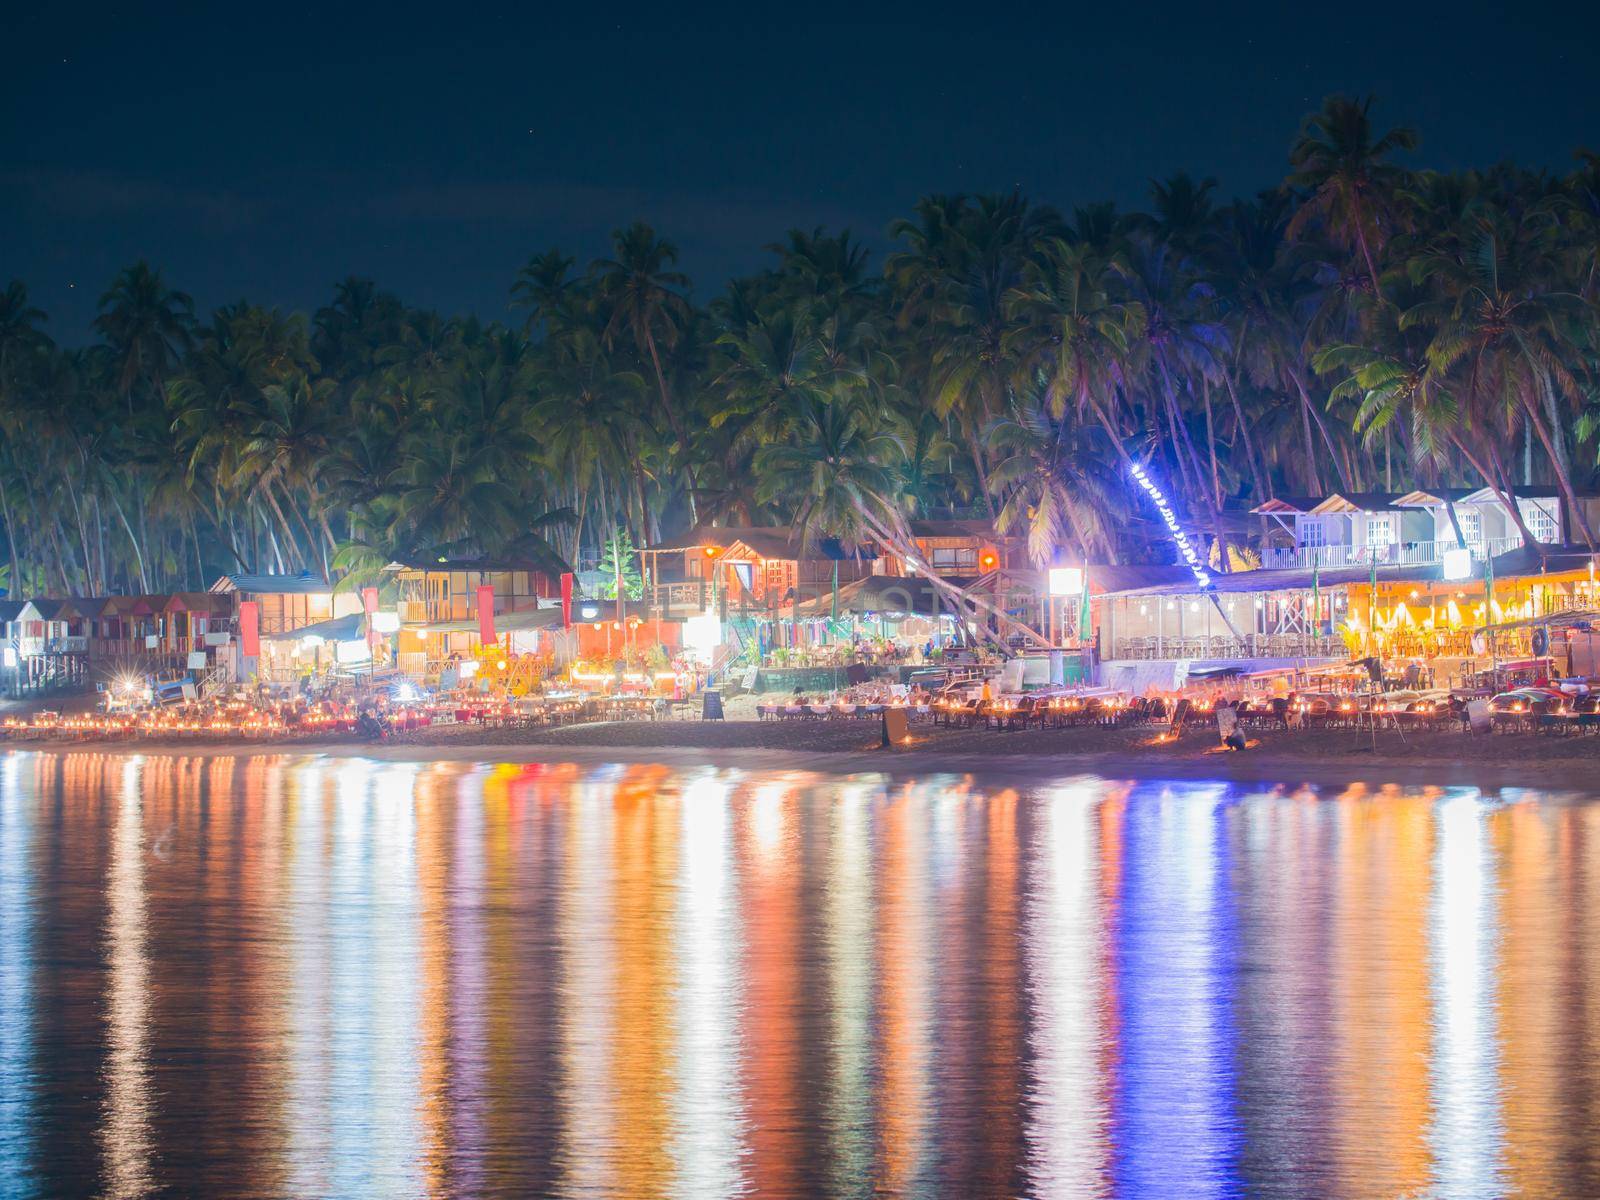 The lights of the nightly Palolem beach in Goa. India. by DovidPro